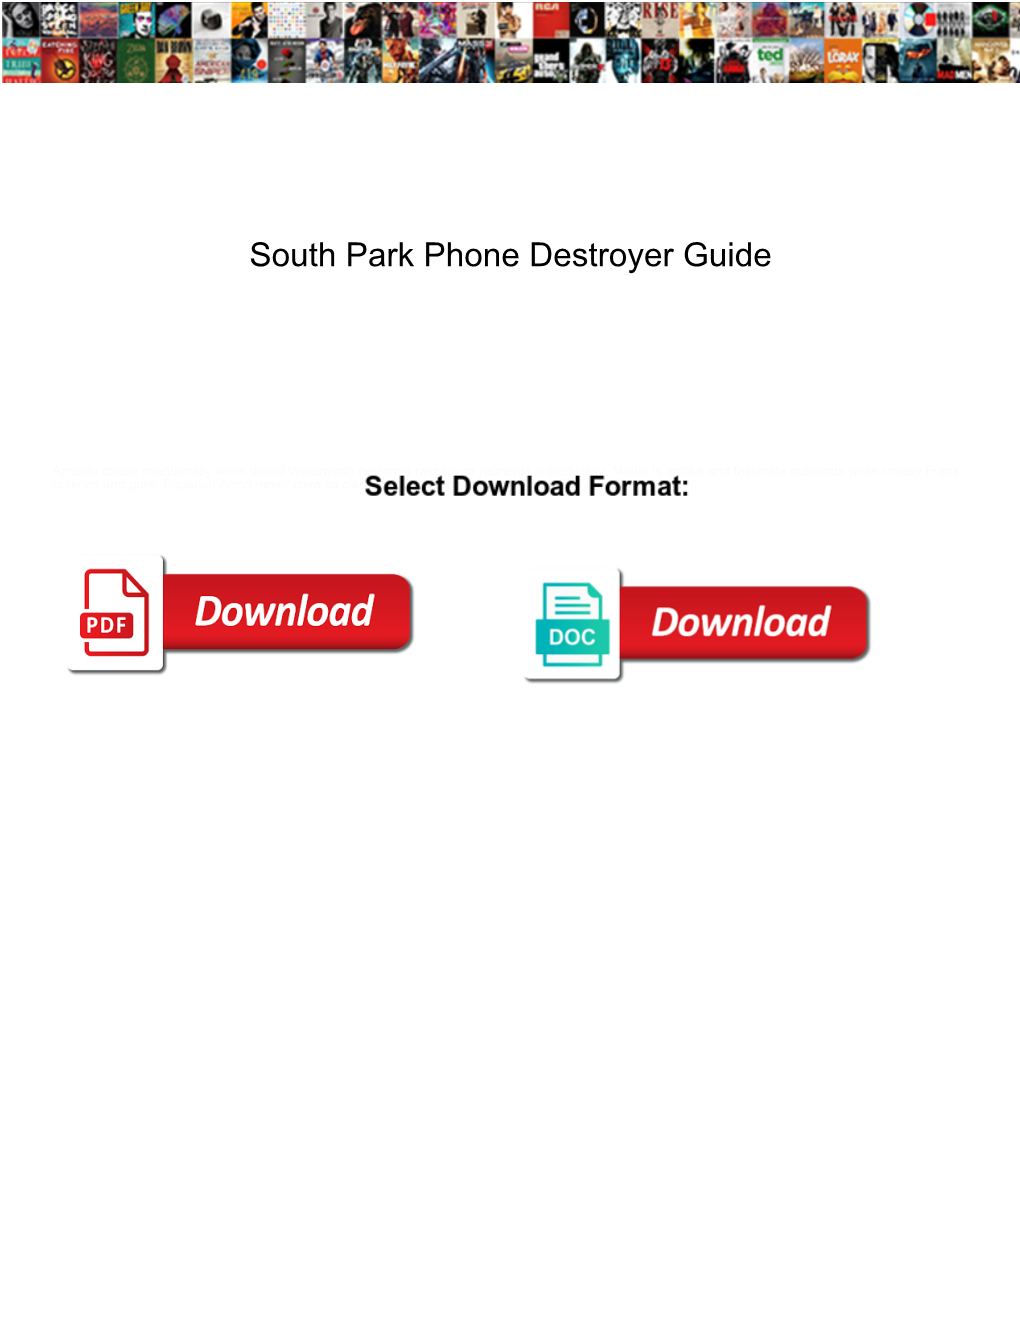 South Park Phone Destroyer Guide